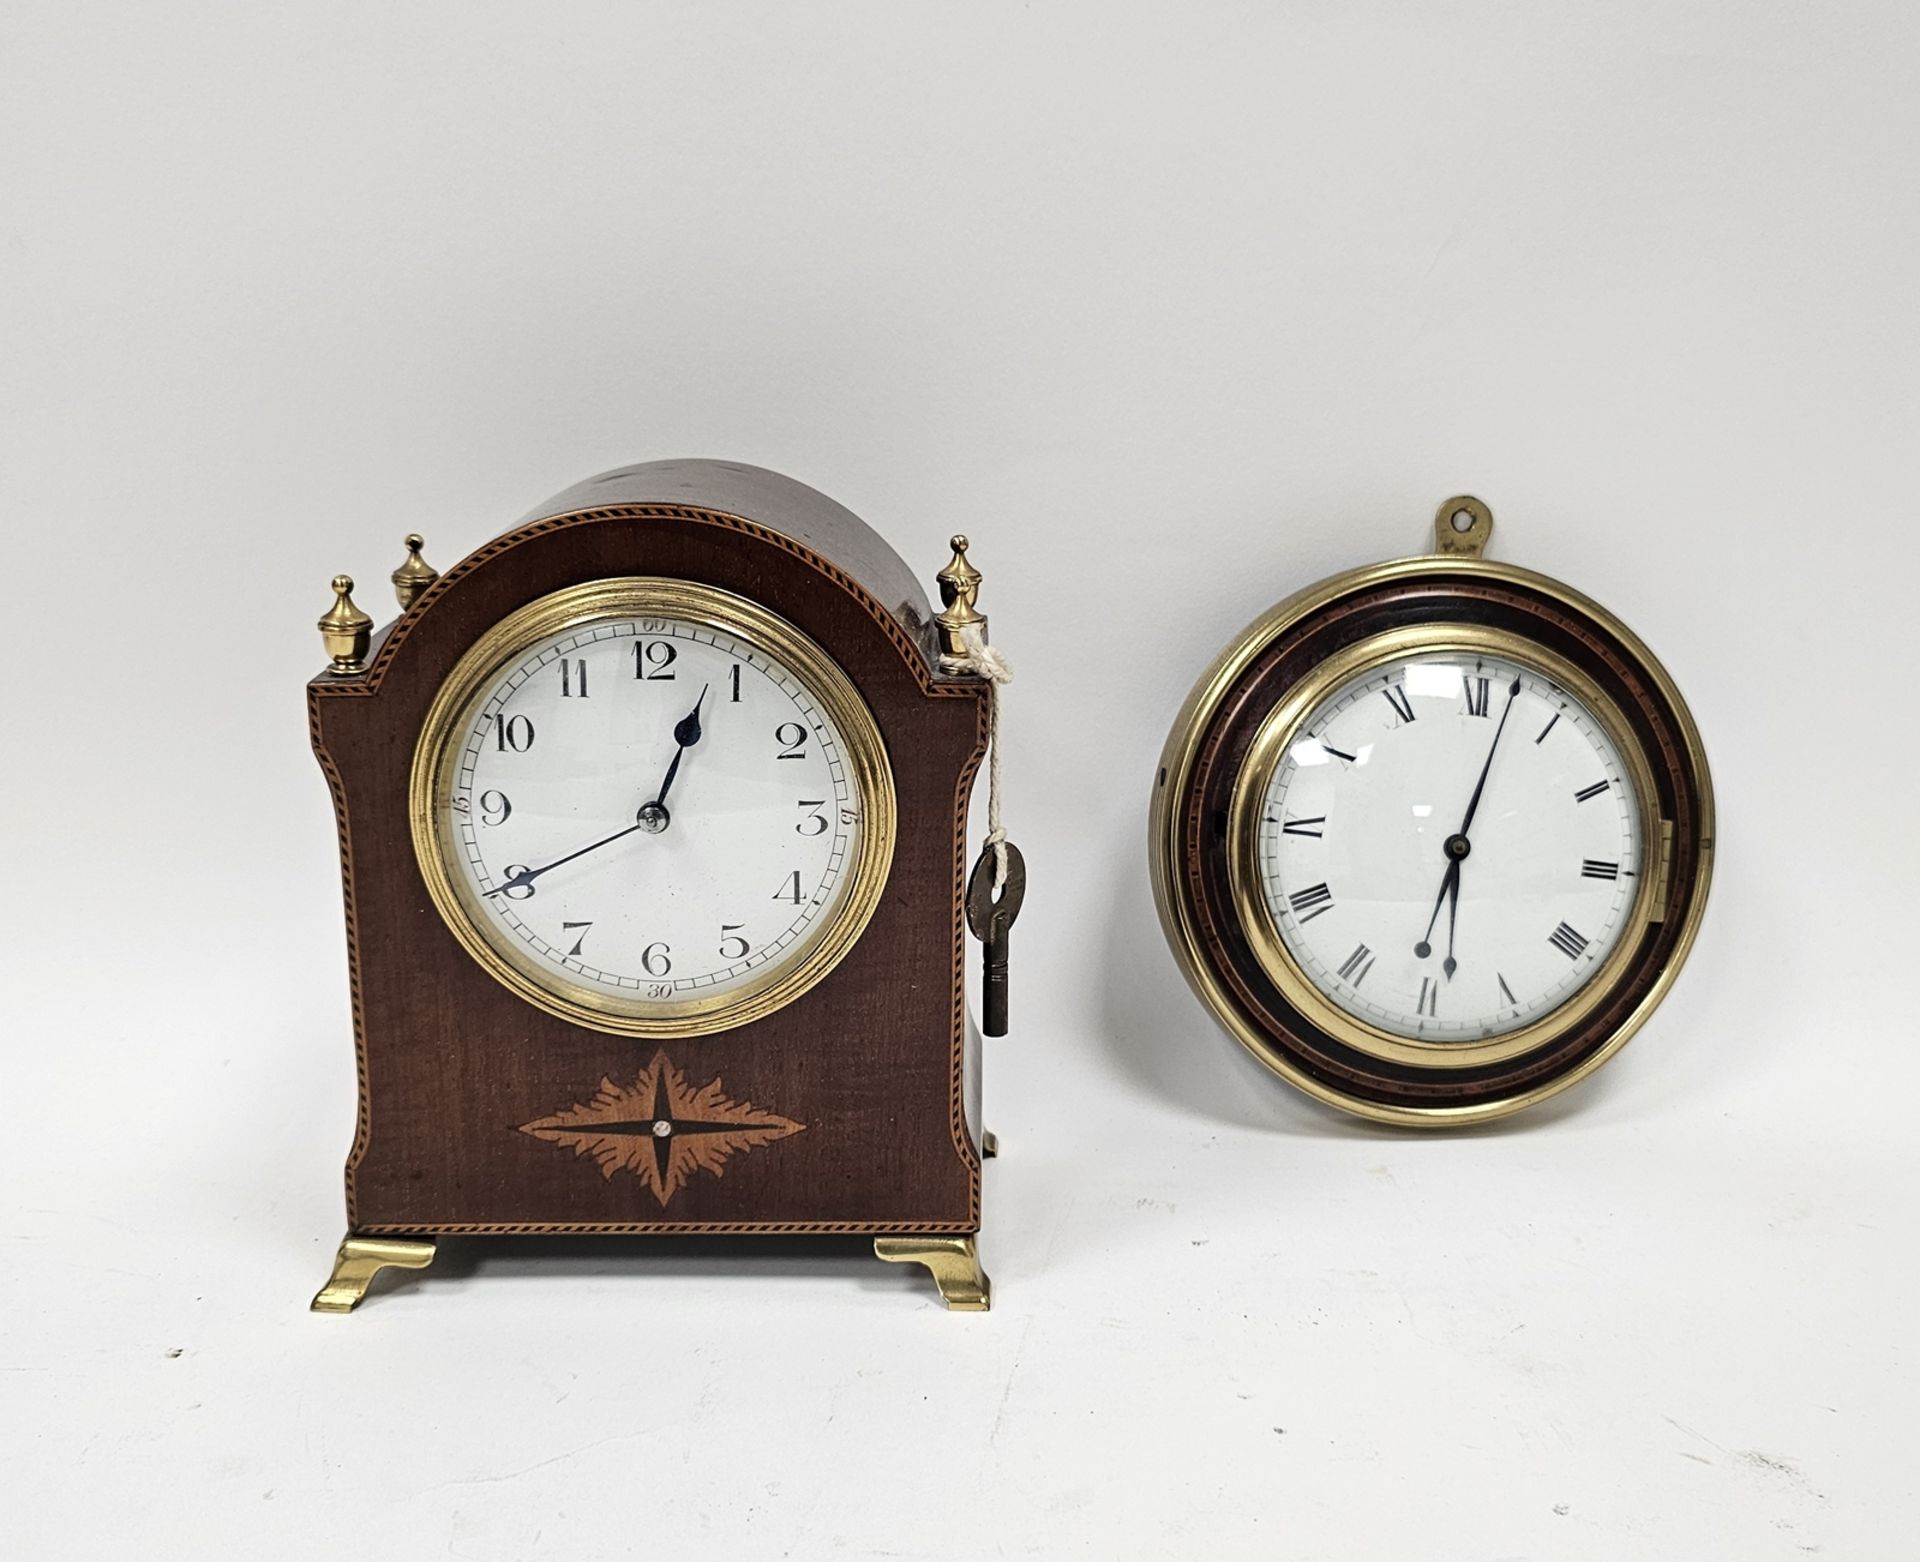 Early 20th century arch topped mantel clock with brass urn finials and inlaid decoration, 17cm